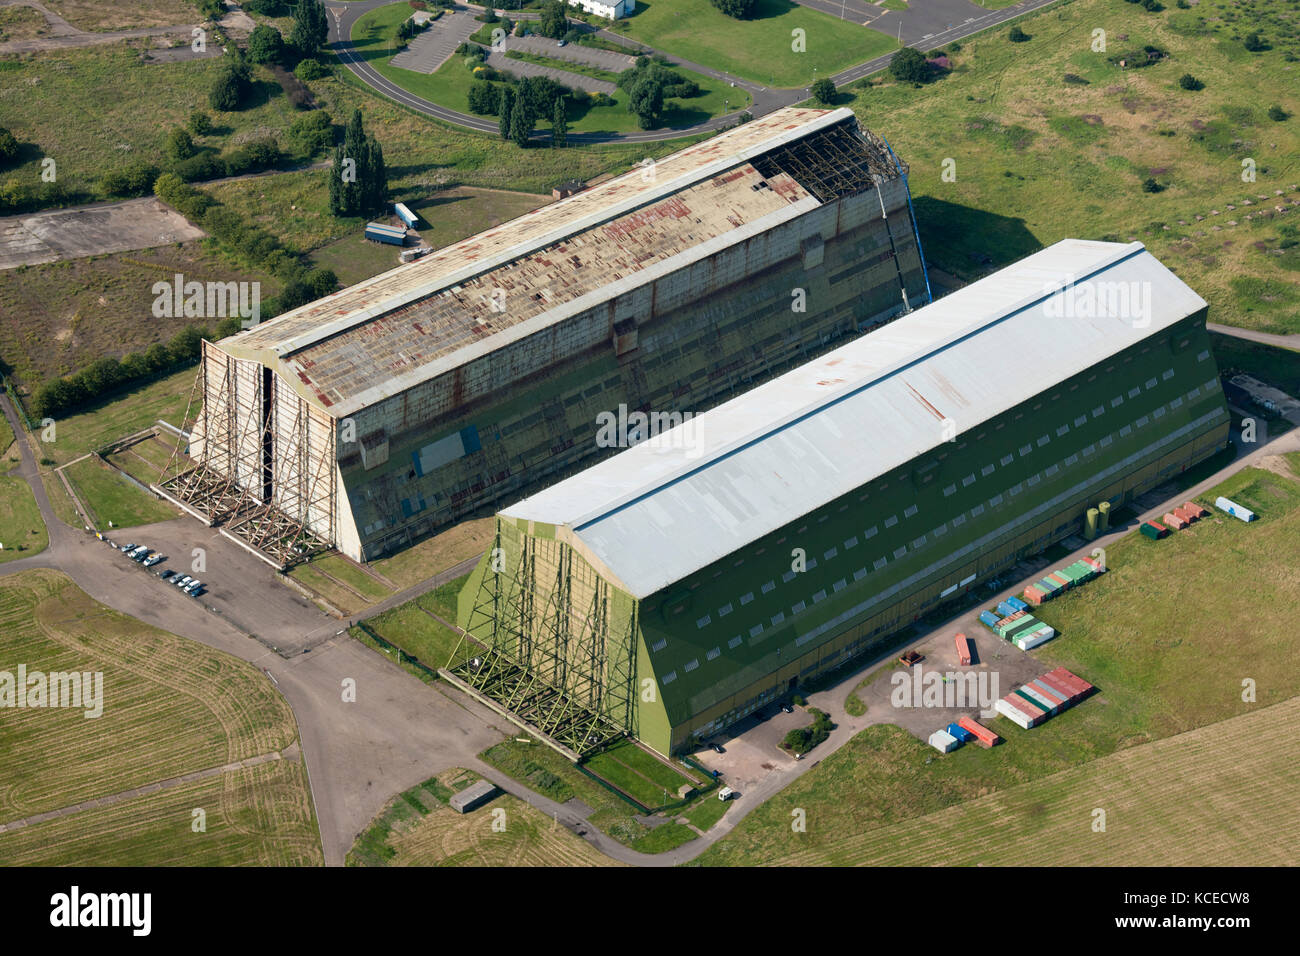 Airship hangars, RAF Cardington, Bedfordshire. No.1 shed was built in 1915 by Short Brothers to build two airships for the navy. After the first world Stock Photo